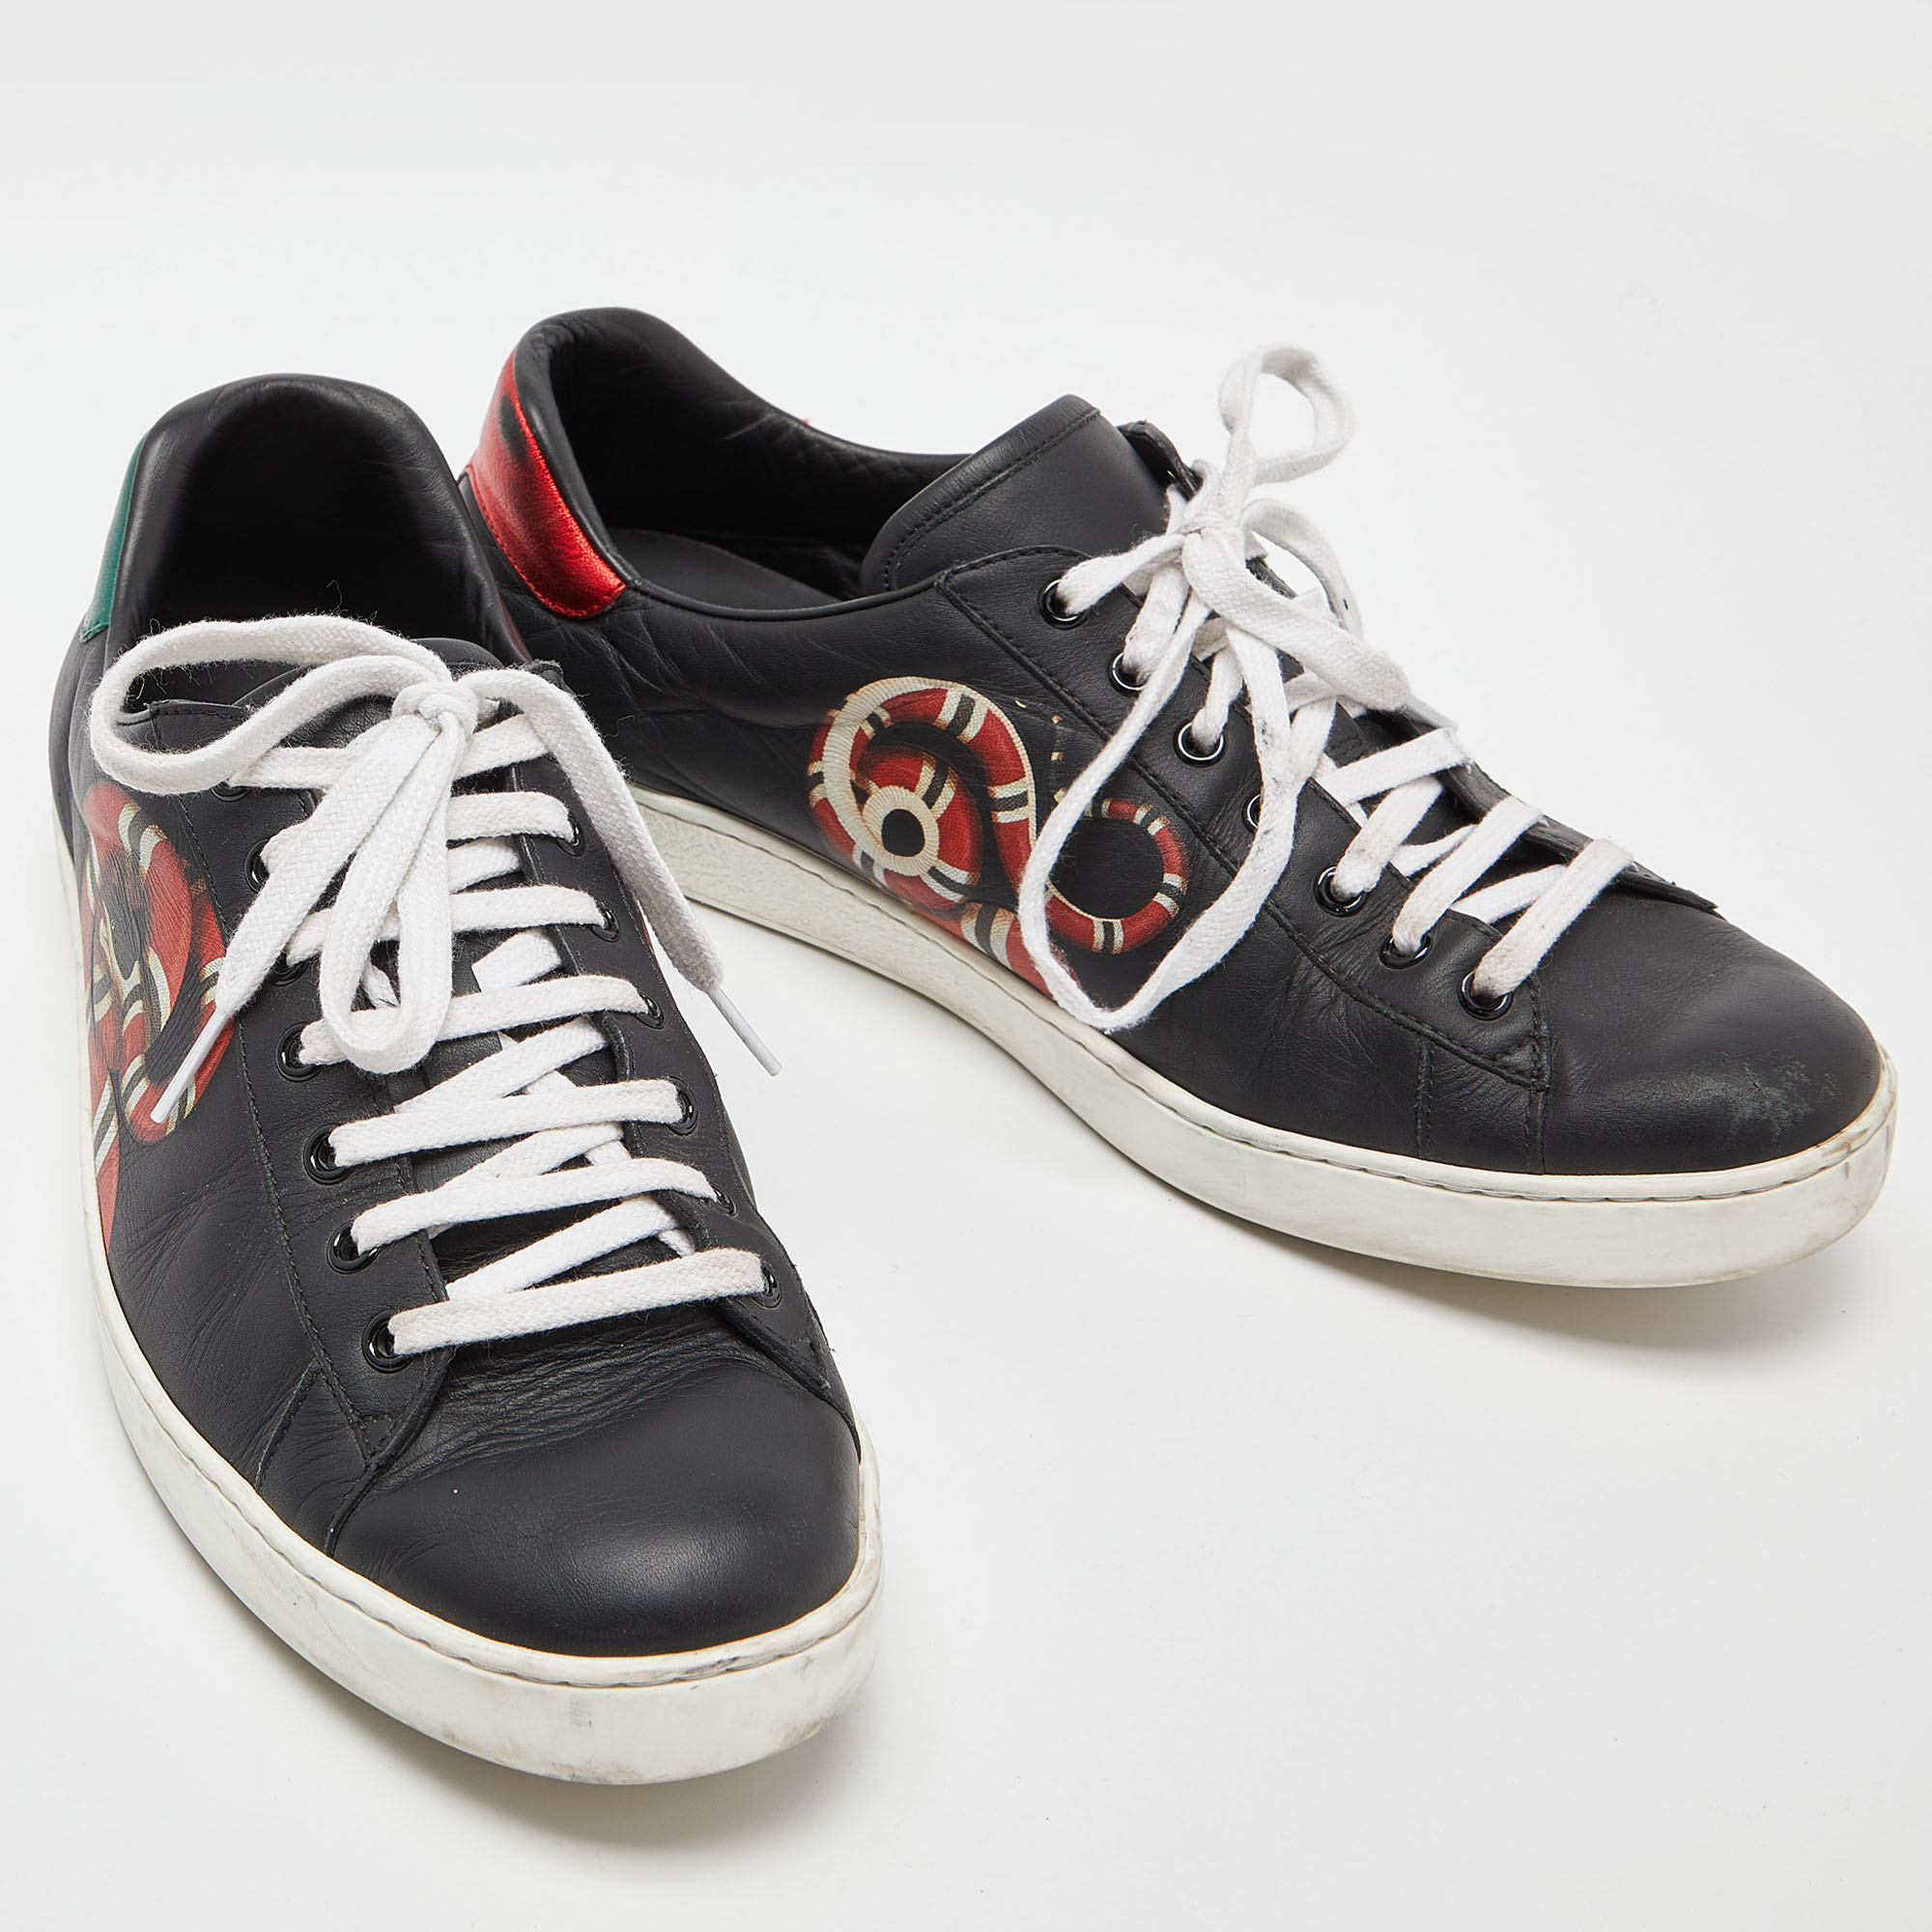 Gucci Black Leather Snake Print Ace Sneakers Size 44